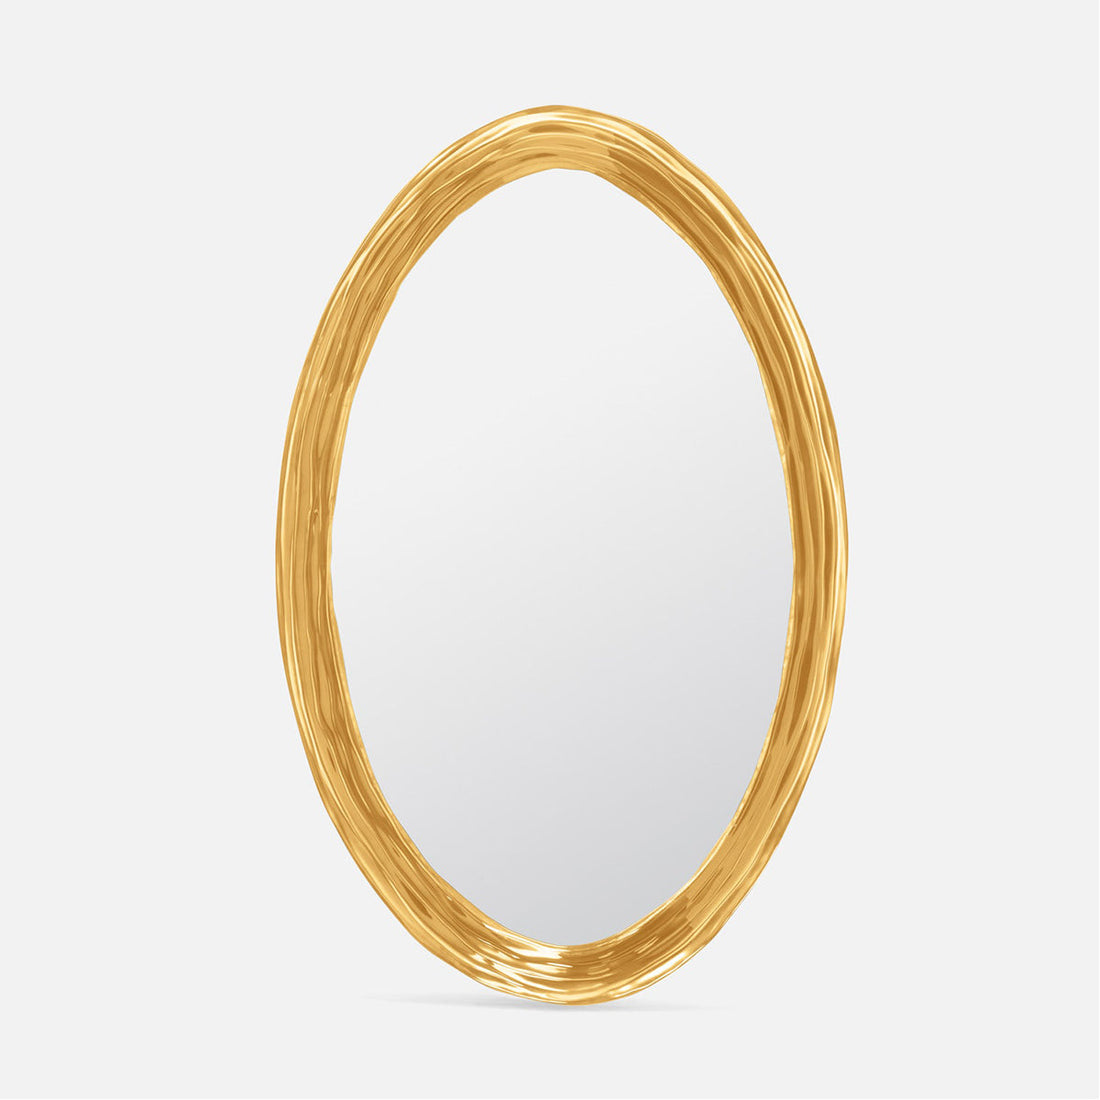 Made Goods Hetty Oval Mirror in Chamomile Translucent Resin